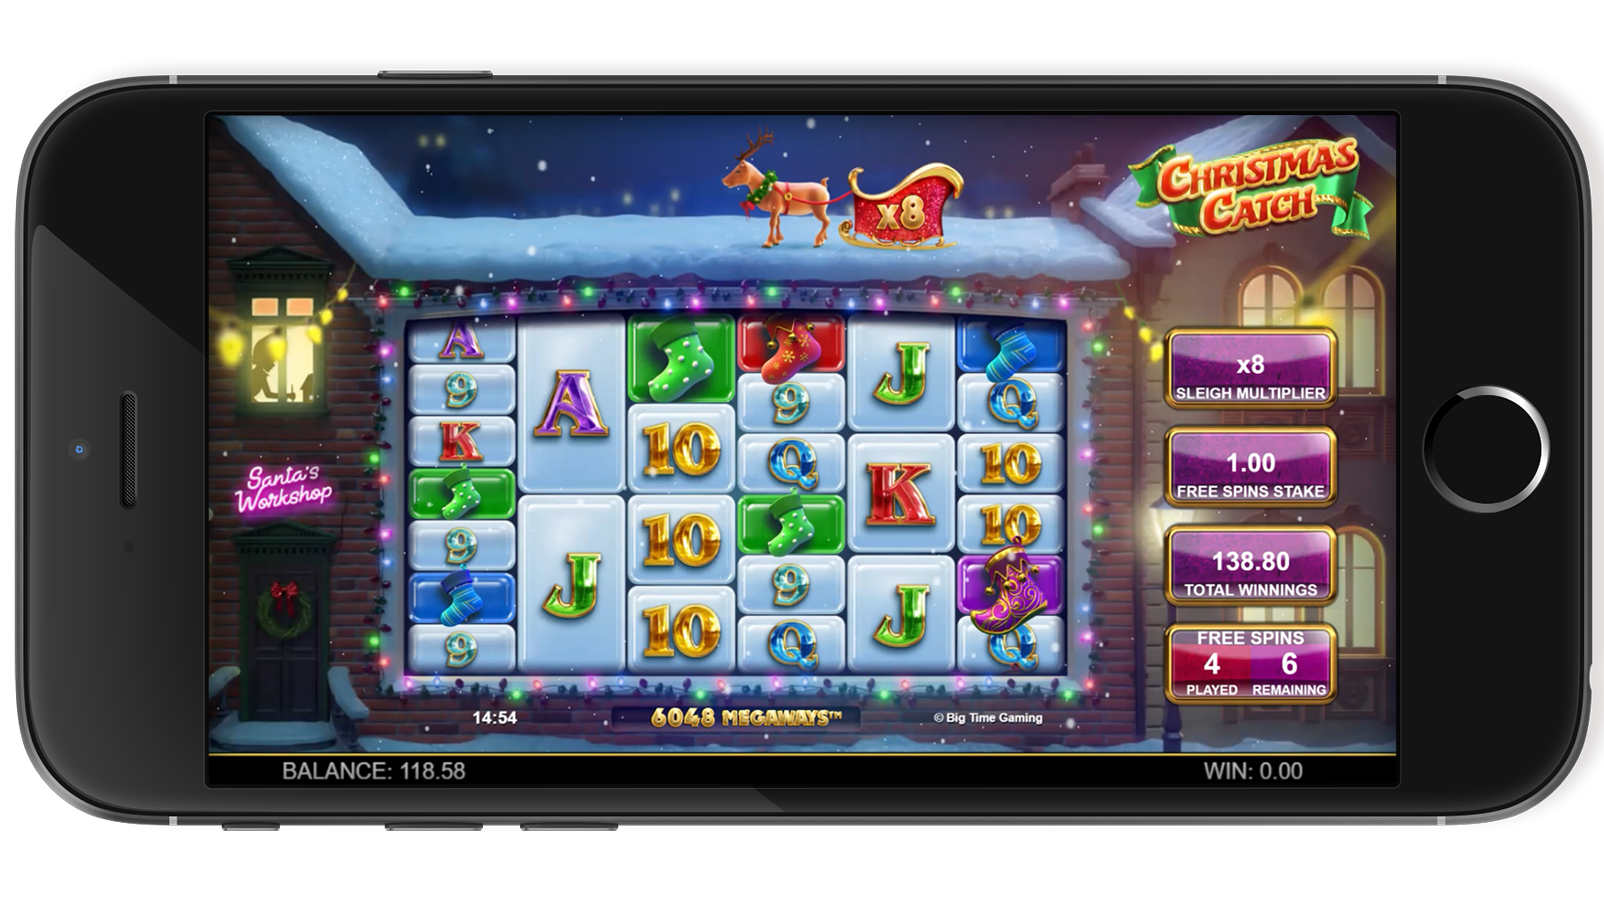 ChristmasCatch_FreeSpins_9_mobile.png